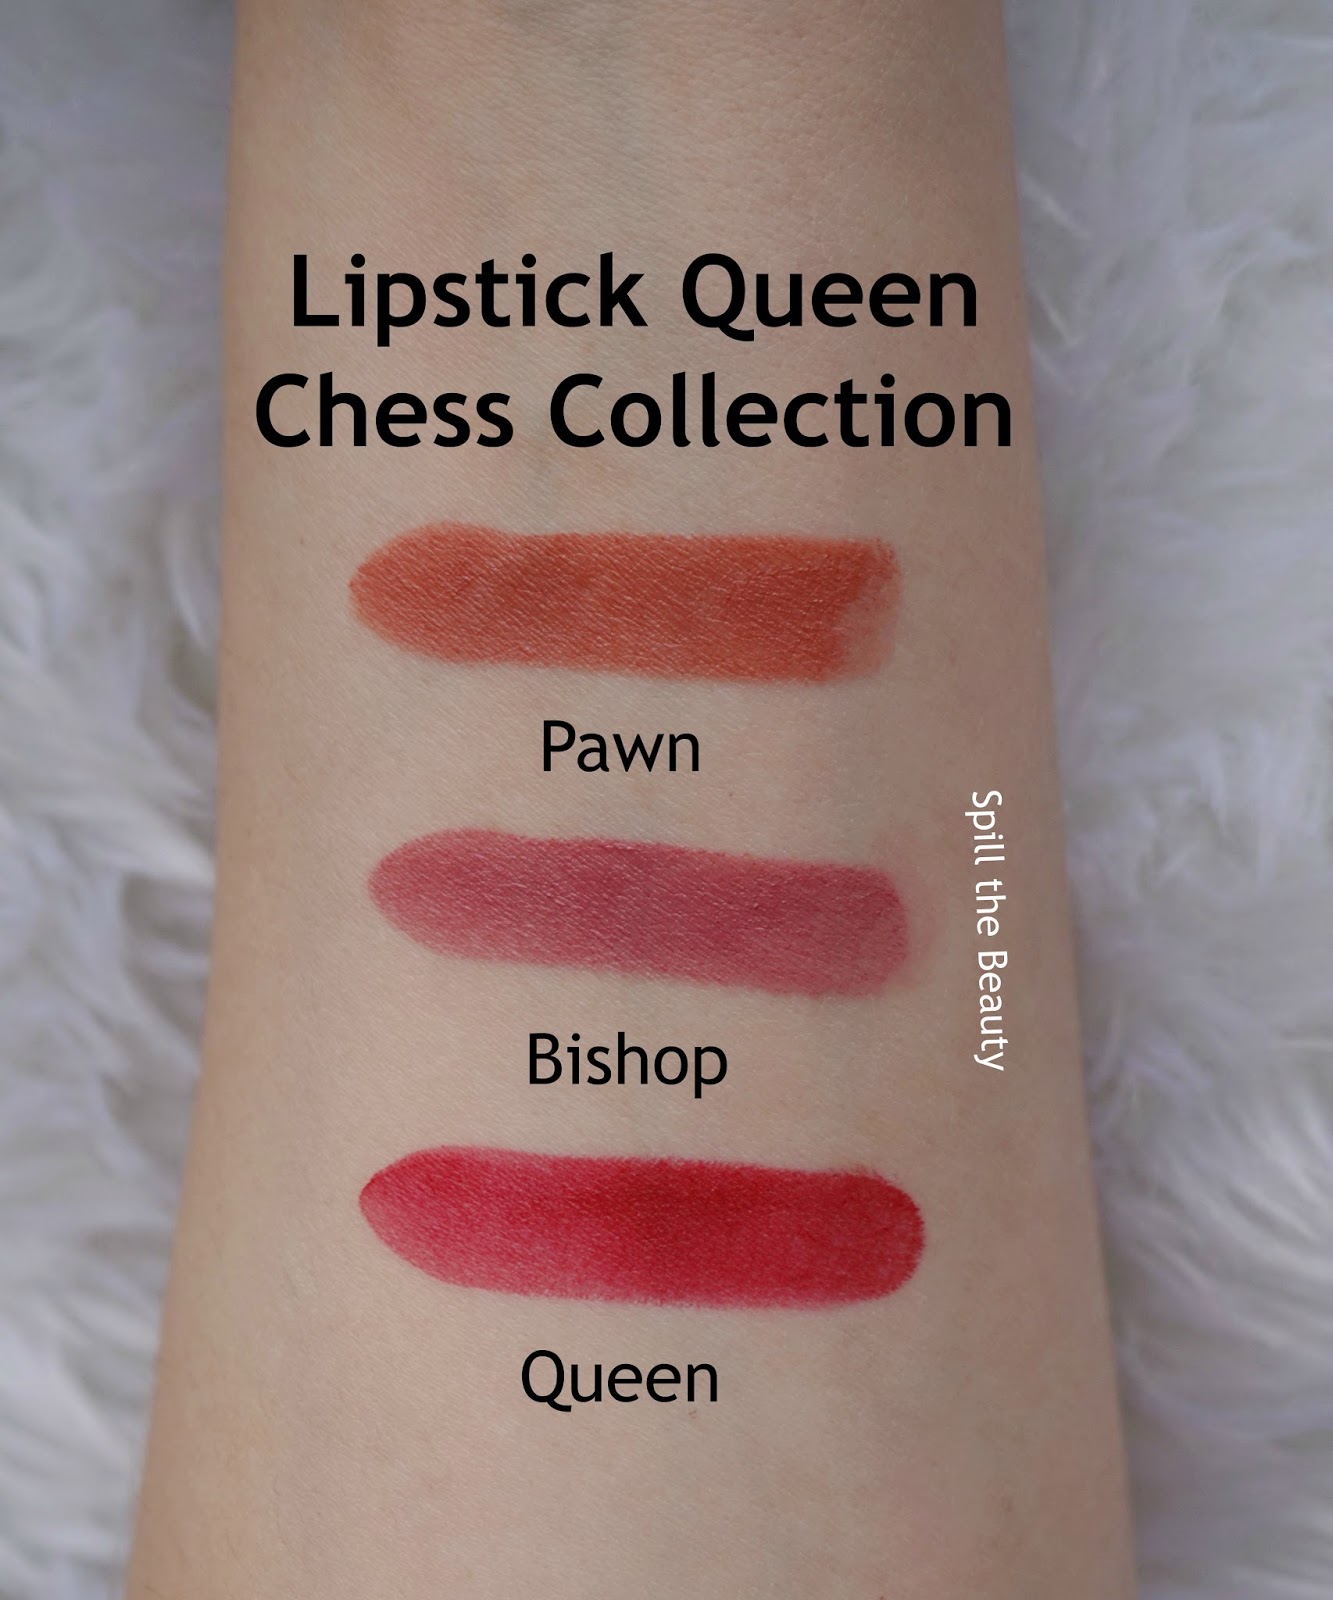 lipstick queen lipstick chess review swatches pawn bishop queen.